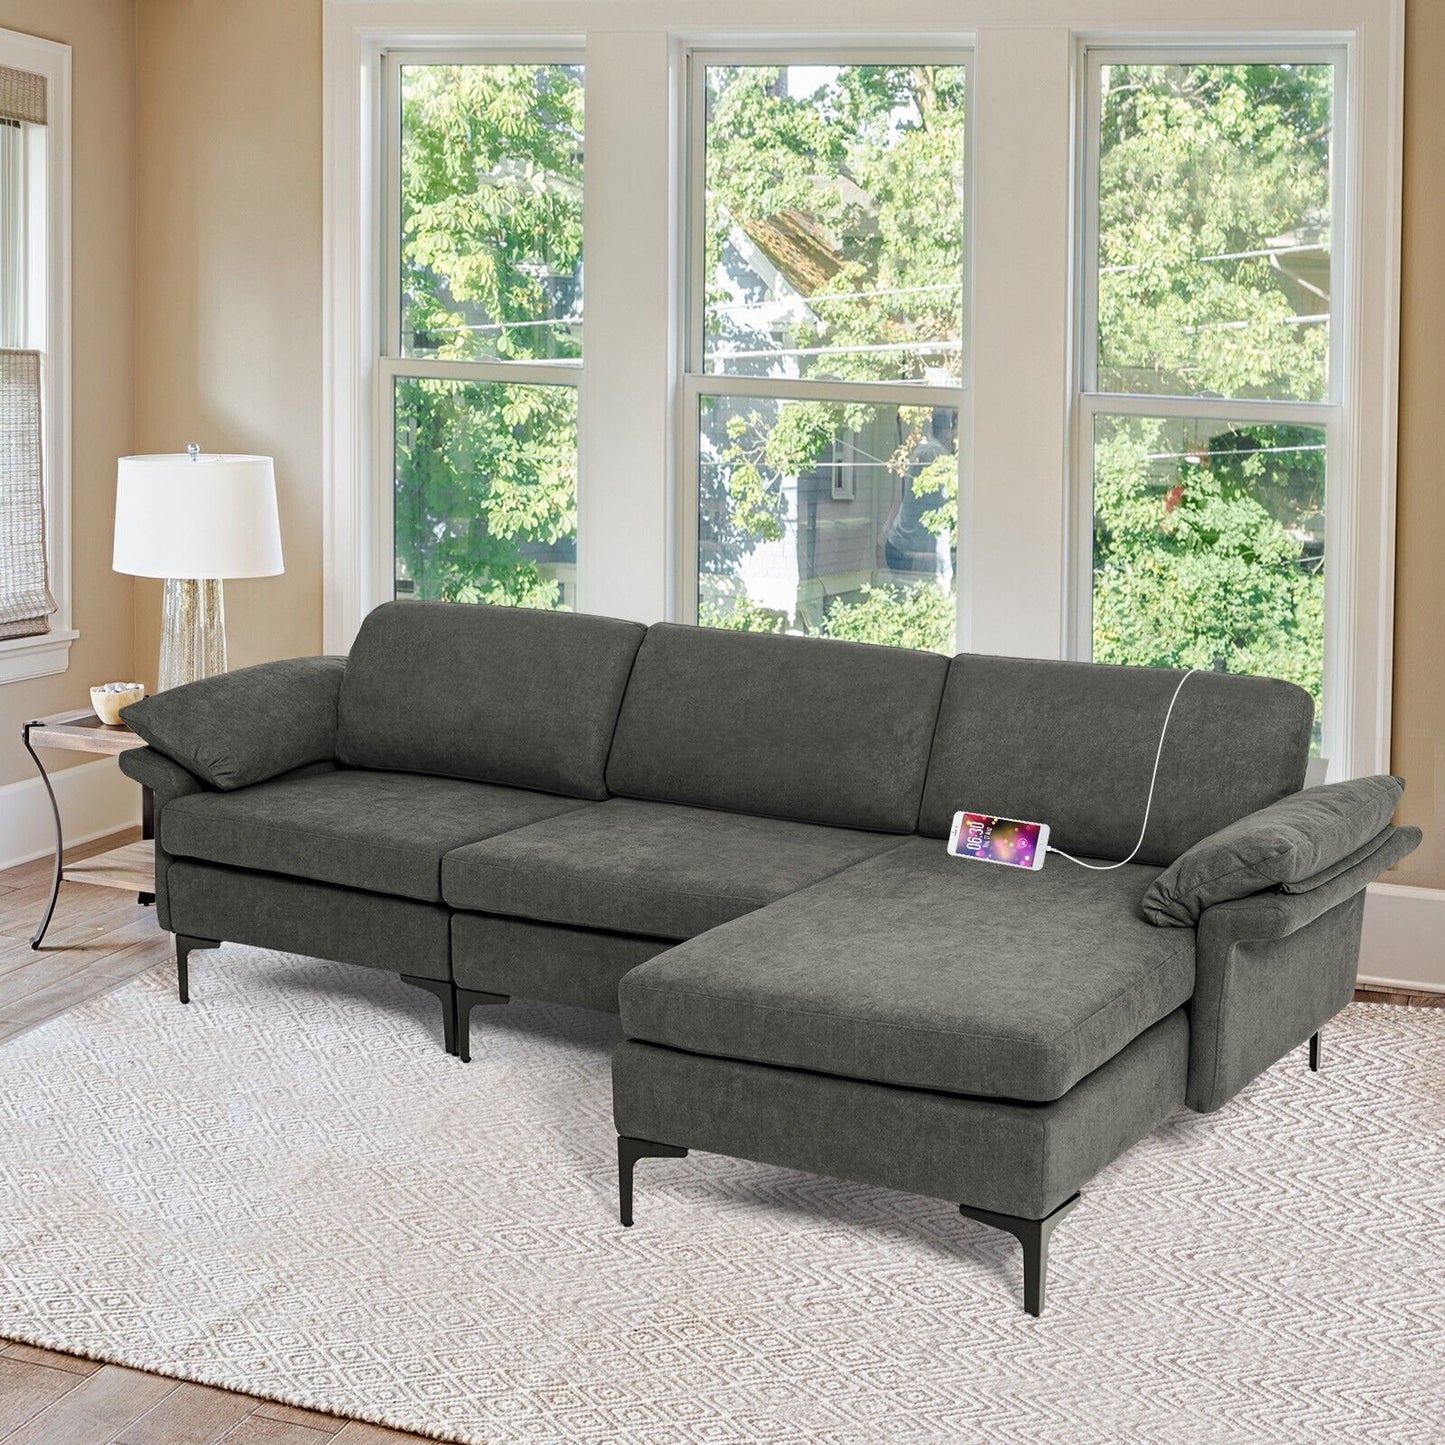 Extra Large Modular L-shaped Sectional Sofa with Reversible Chaise for 4-5 People, Gray